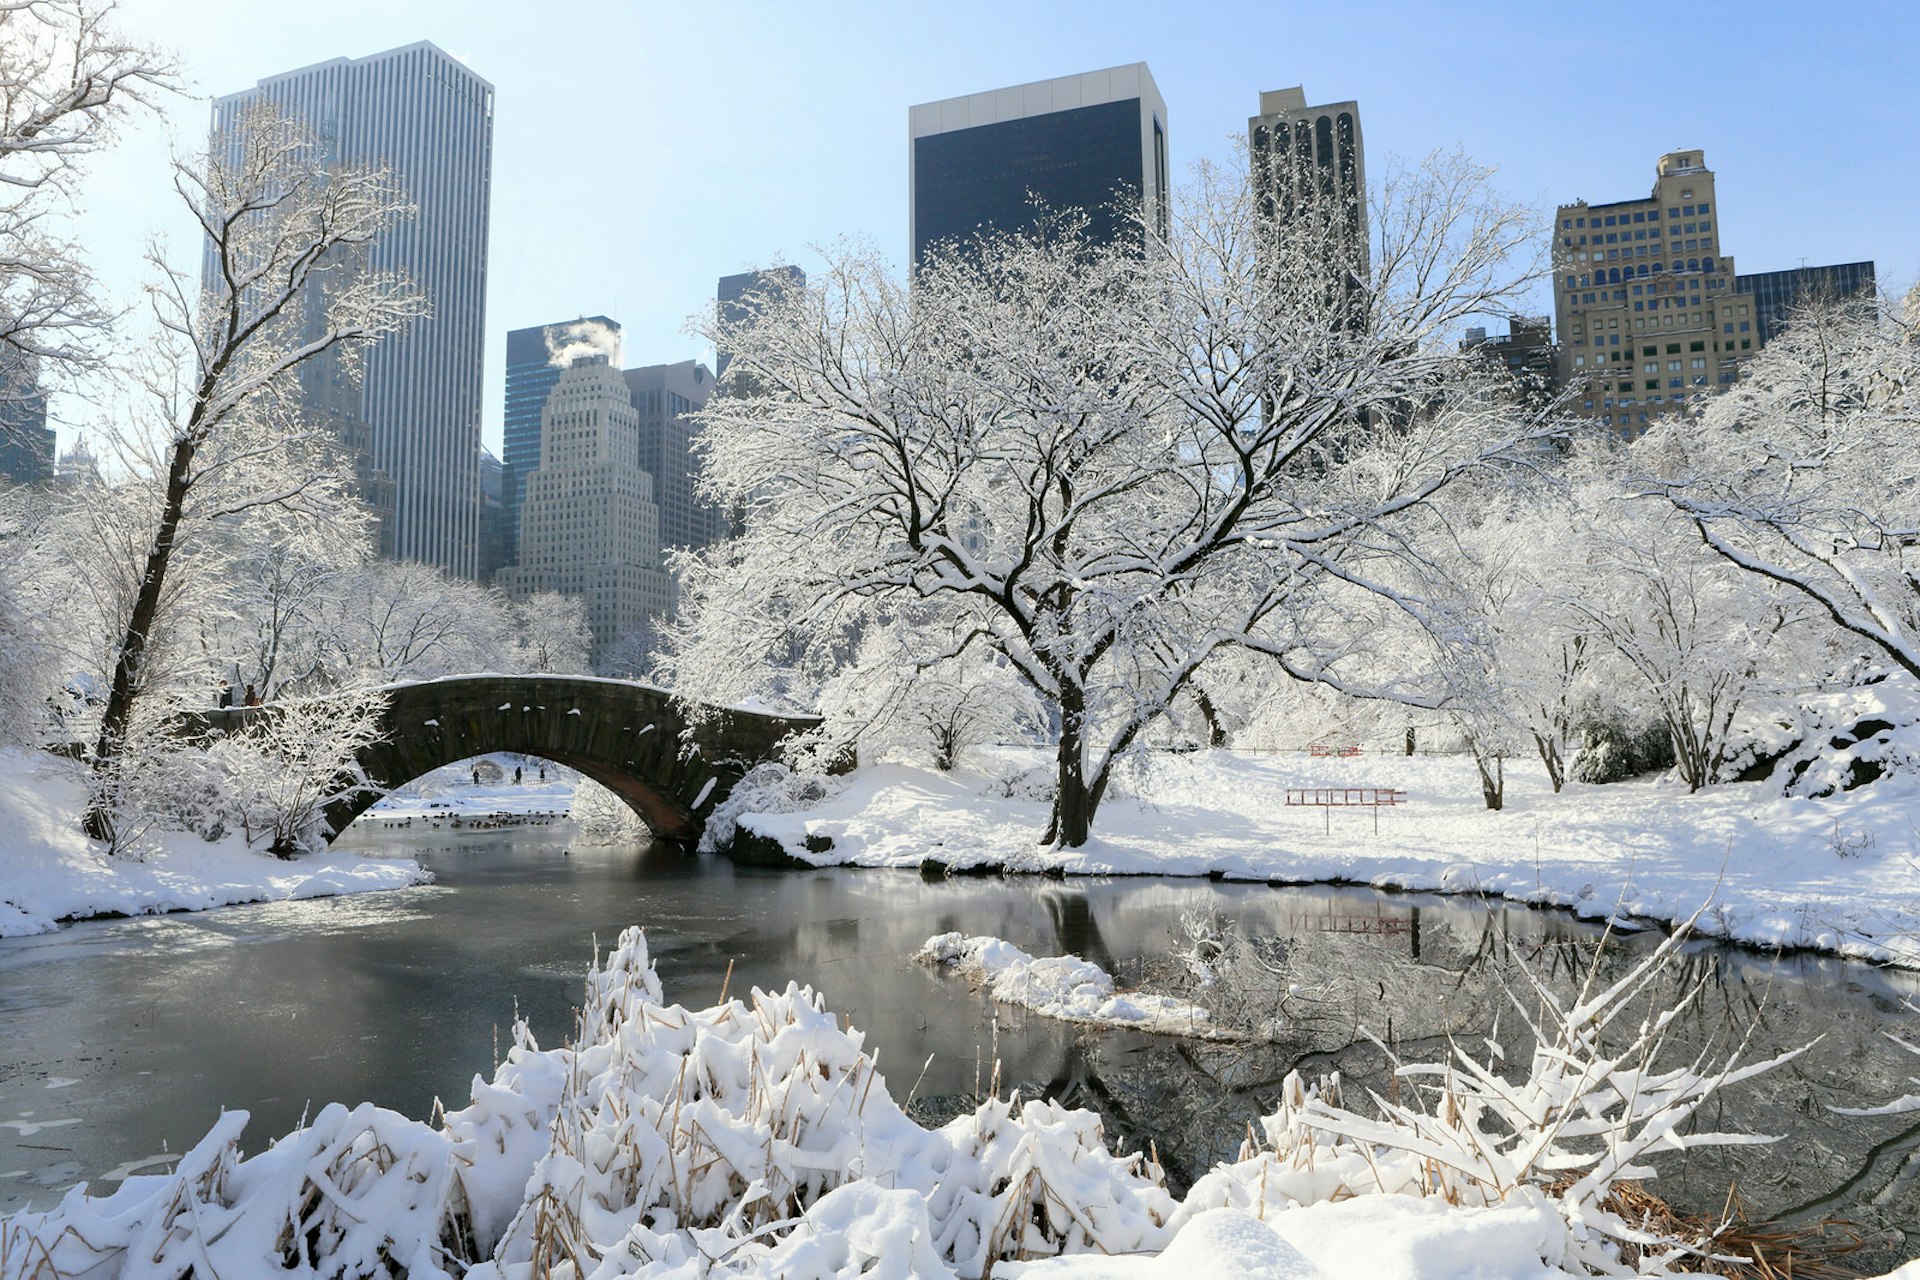 New York's Central Park blanketed in snow © EarthScape ImageGraphy / Shutterstock